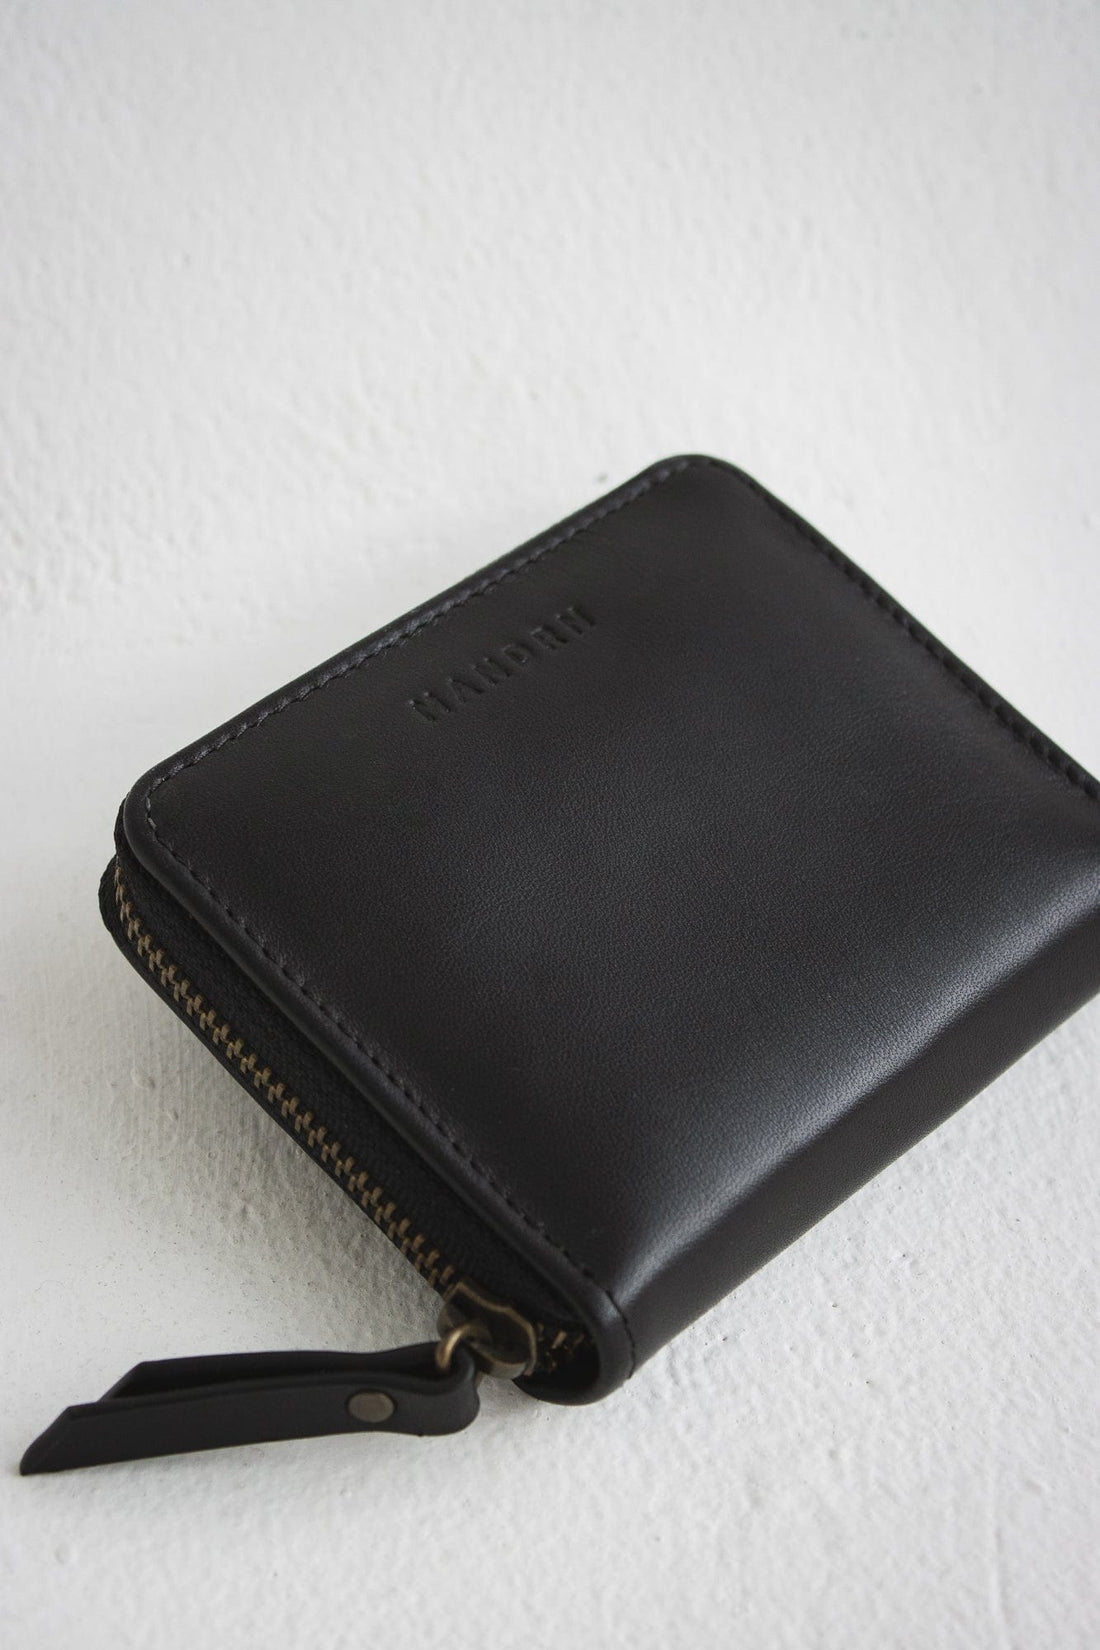 MANDRN | The Cardholder Luxe - Black Leather Wallet